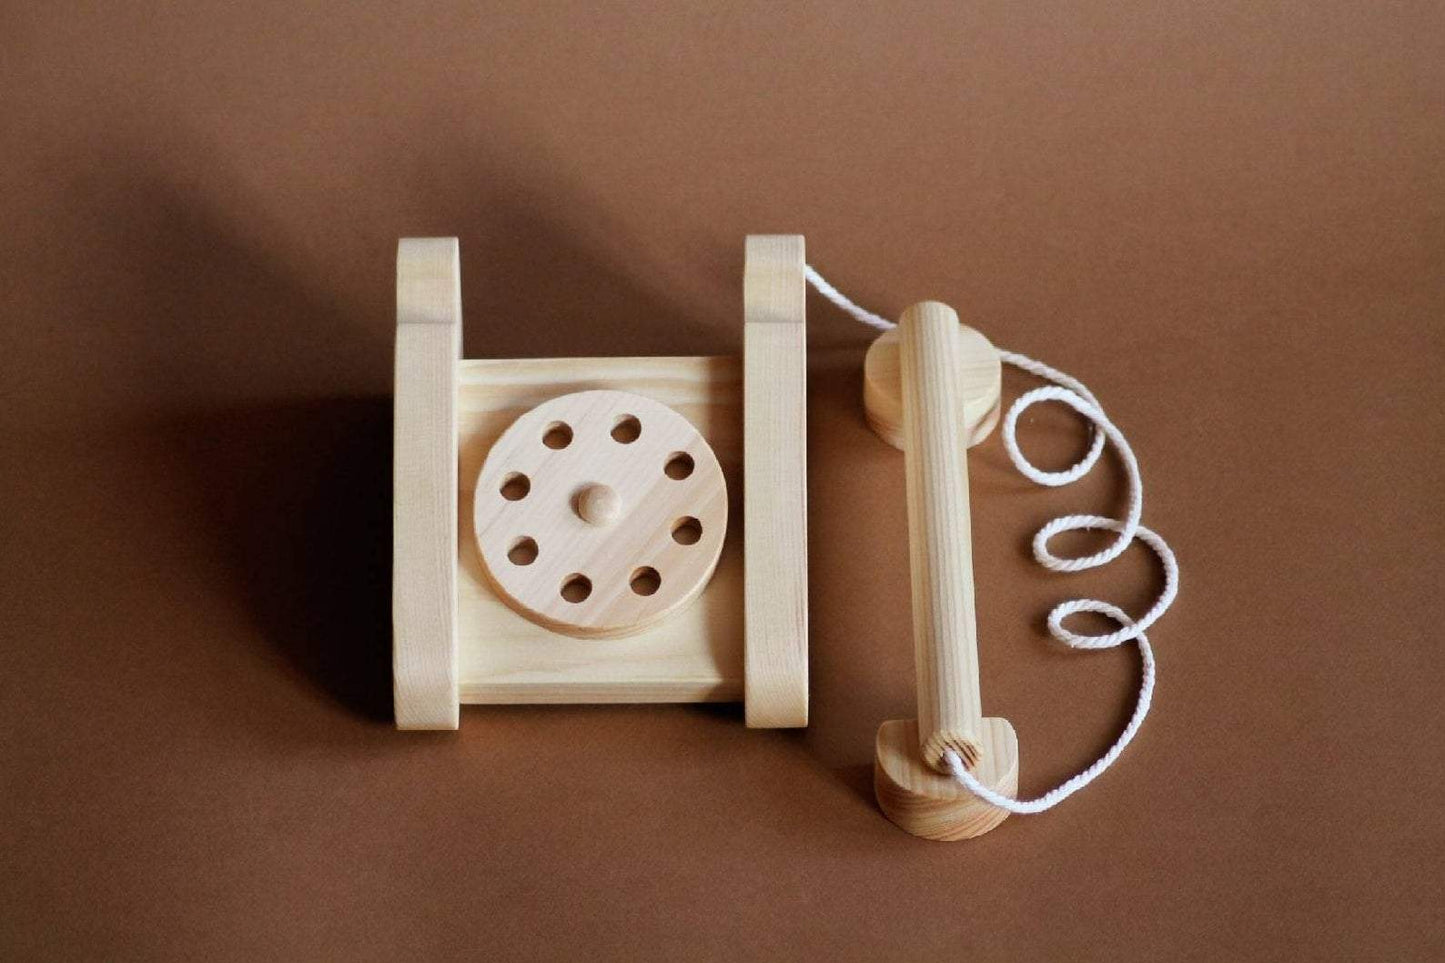 Old Fashion Wooden Telephone Toy - WERONE